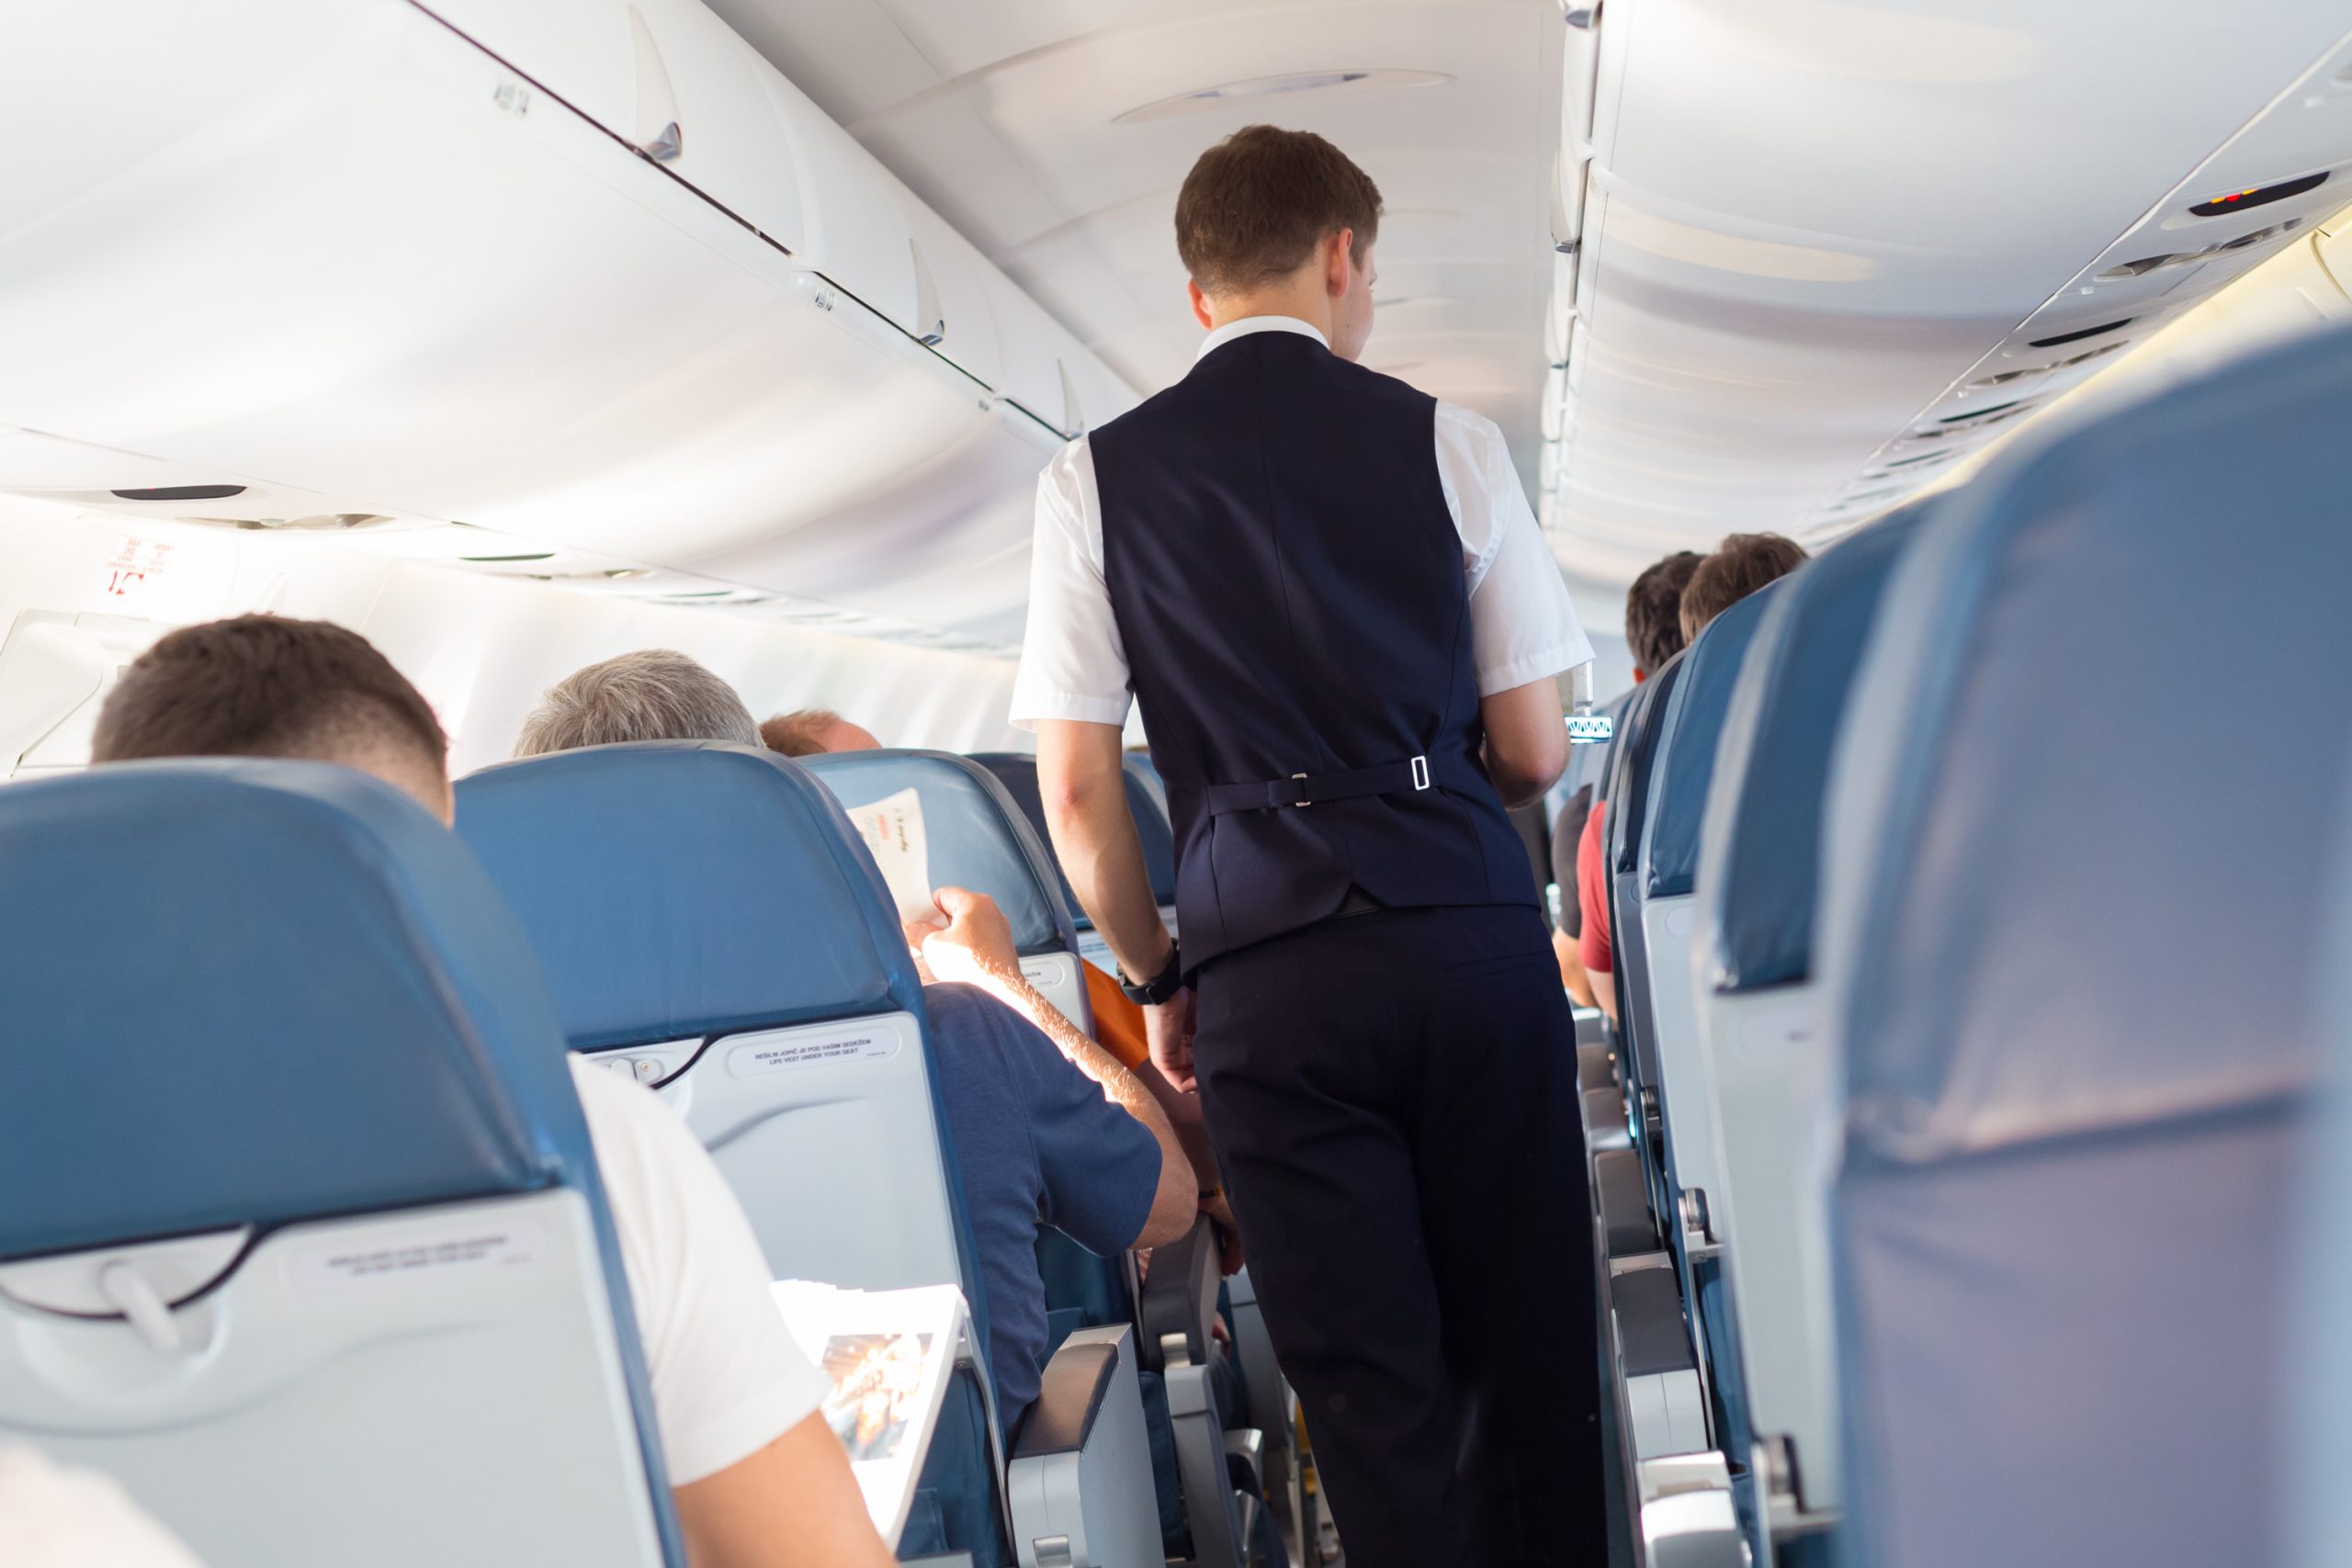 Interior of airplane with passengers on seats and steward walking the aisle.